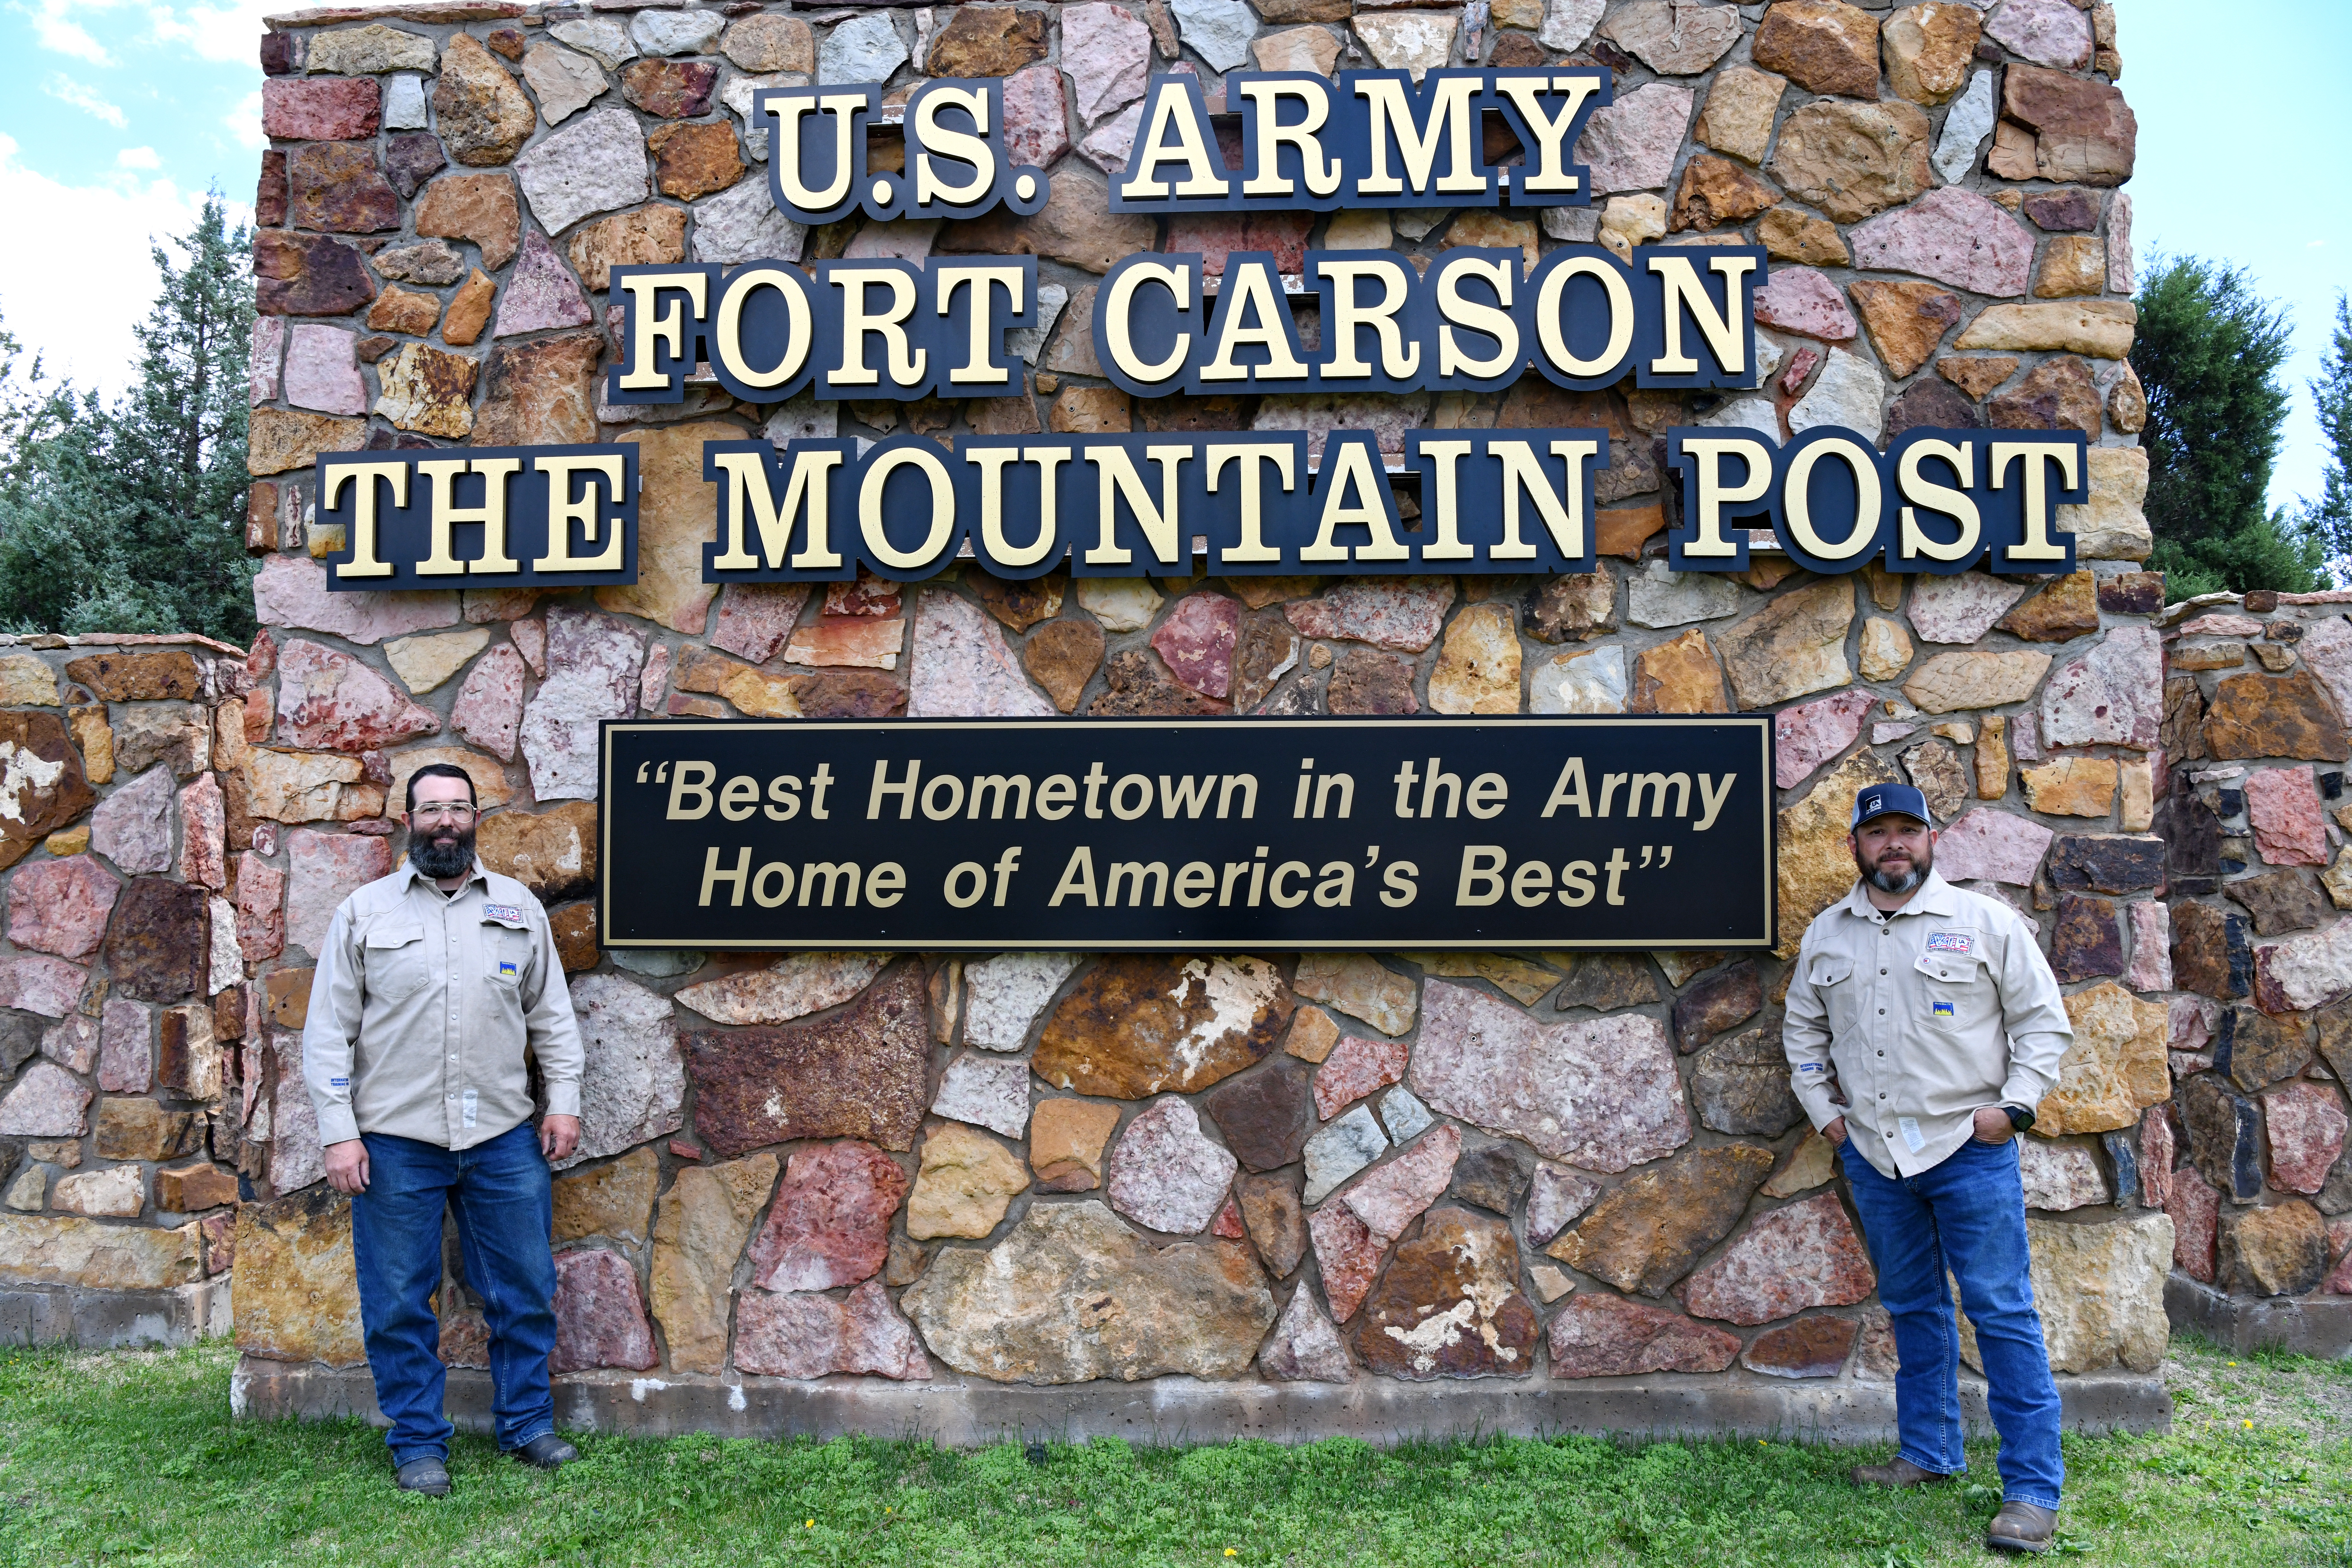 United Association Veterans In Piping (VIP) Program - Fort Carson Instructors Jose Bellejo and Jason Smith